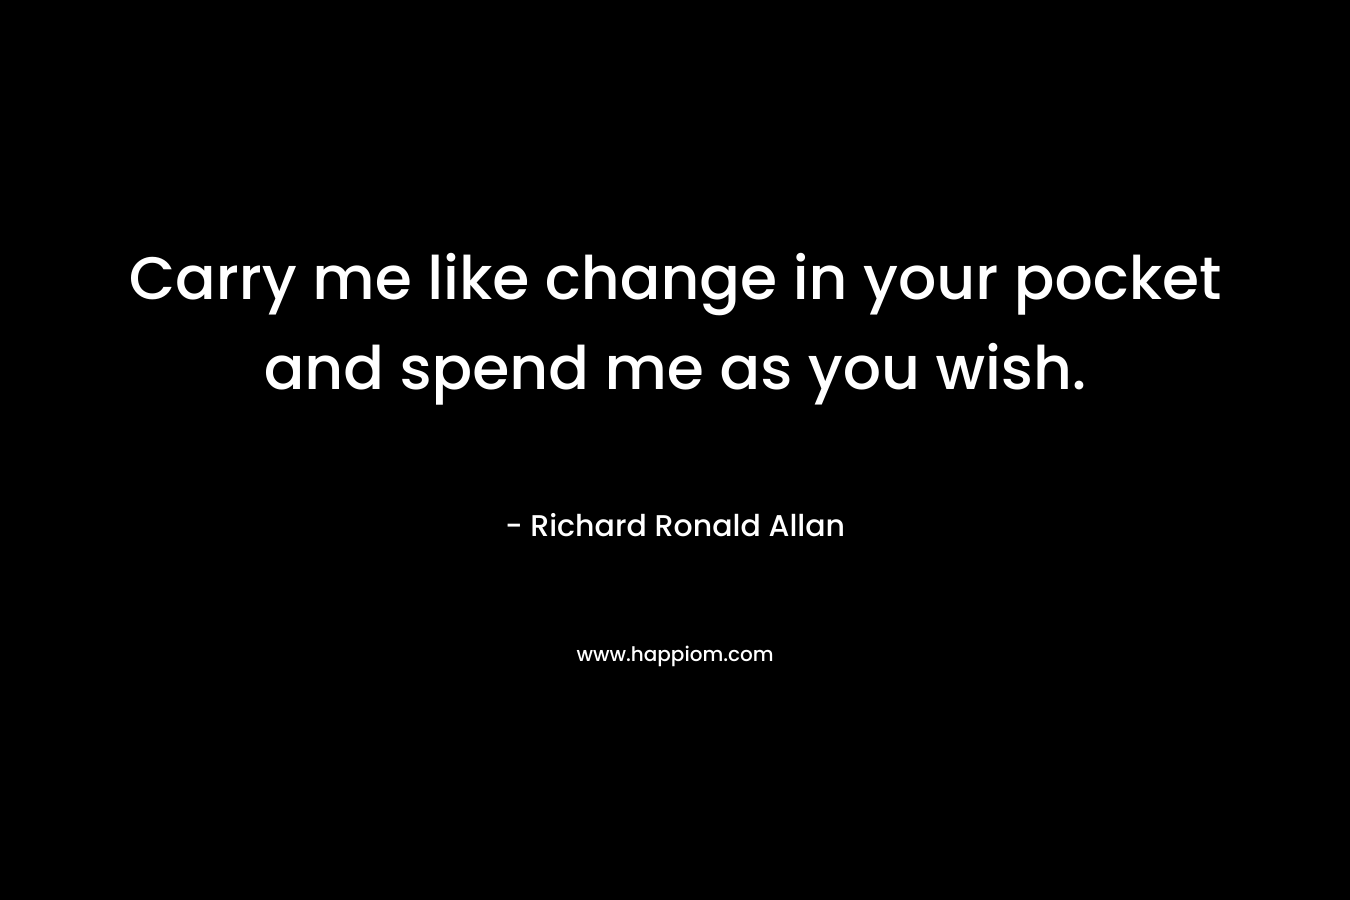 Carry me like change in your pocket and spend me as you wish. – Richard Ronald Allan